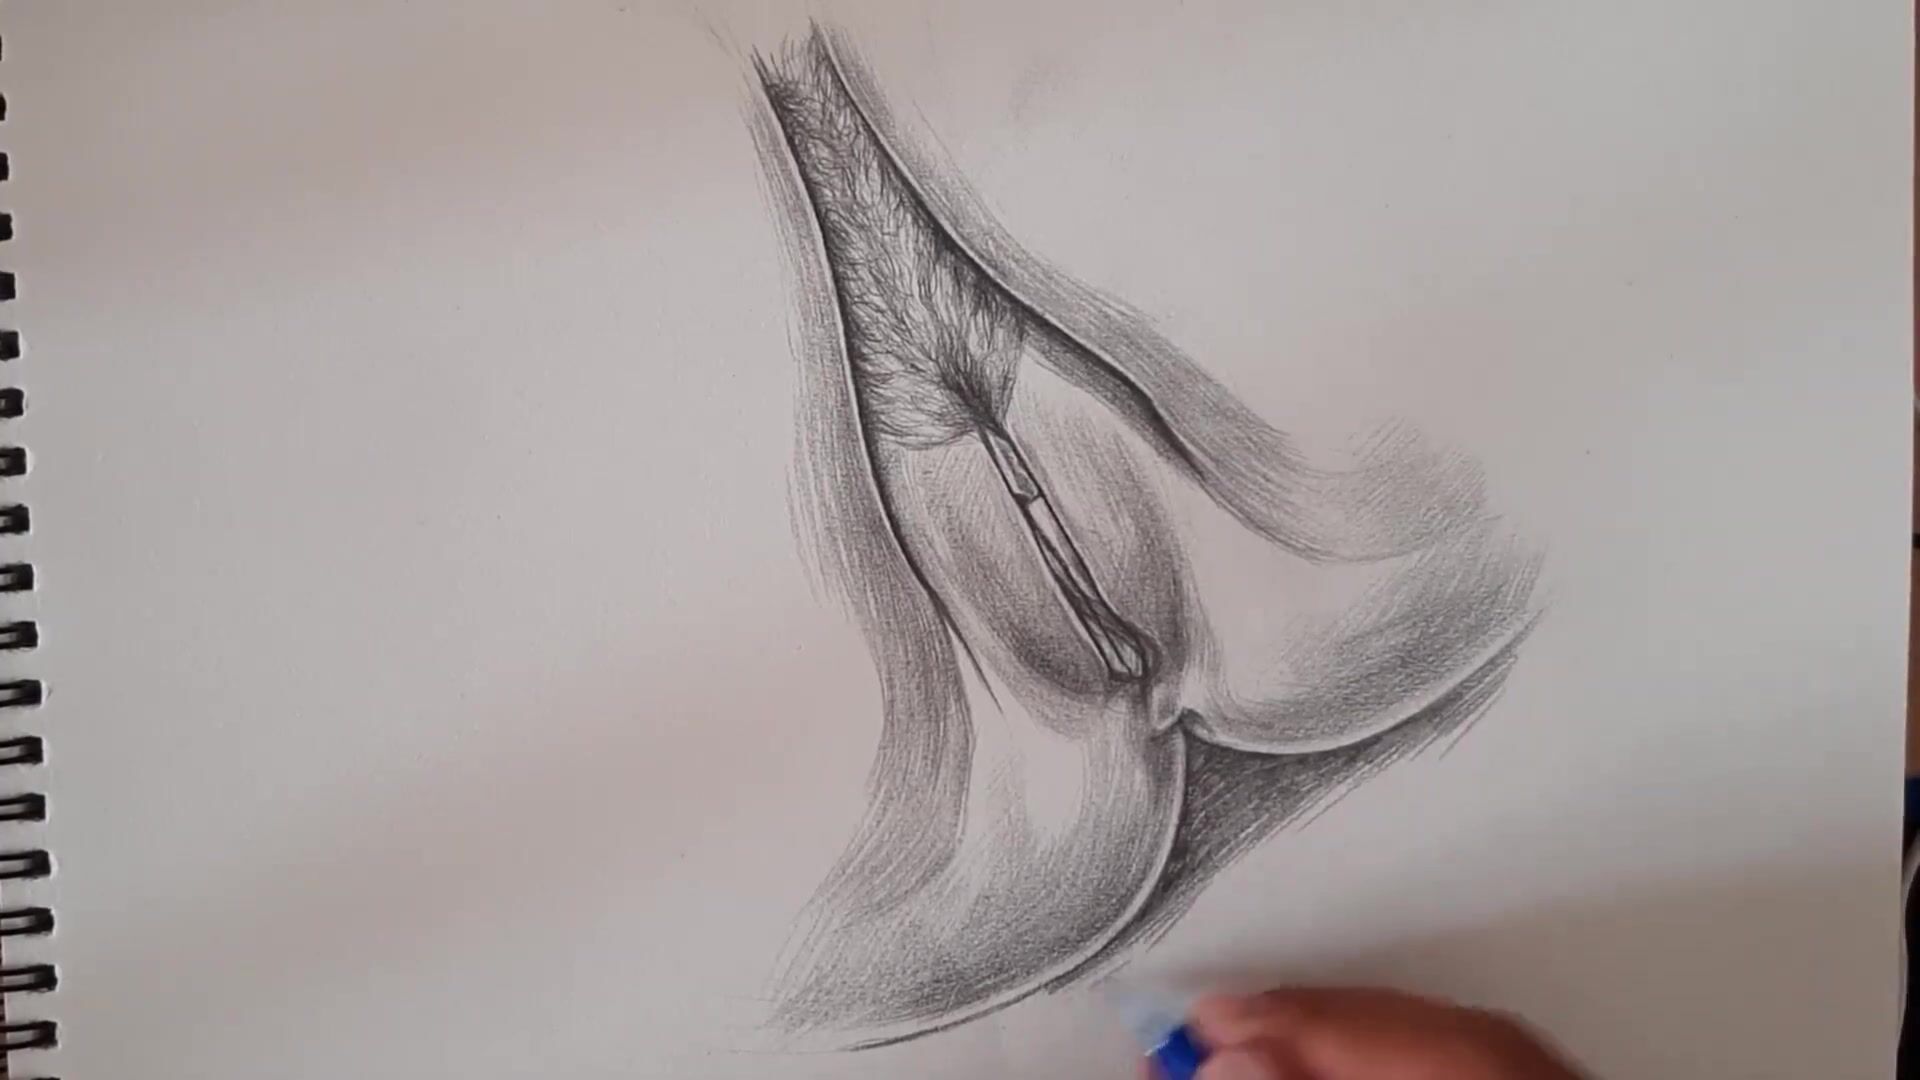 Extreme Anal Humiliation Porn Drawings - ROUGH PUSSY TREATMENT,A beautiful flower drawing female figure HD Porn,  Hardcore, watch online